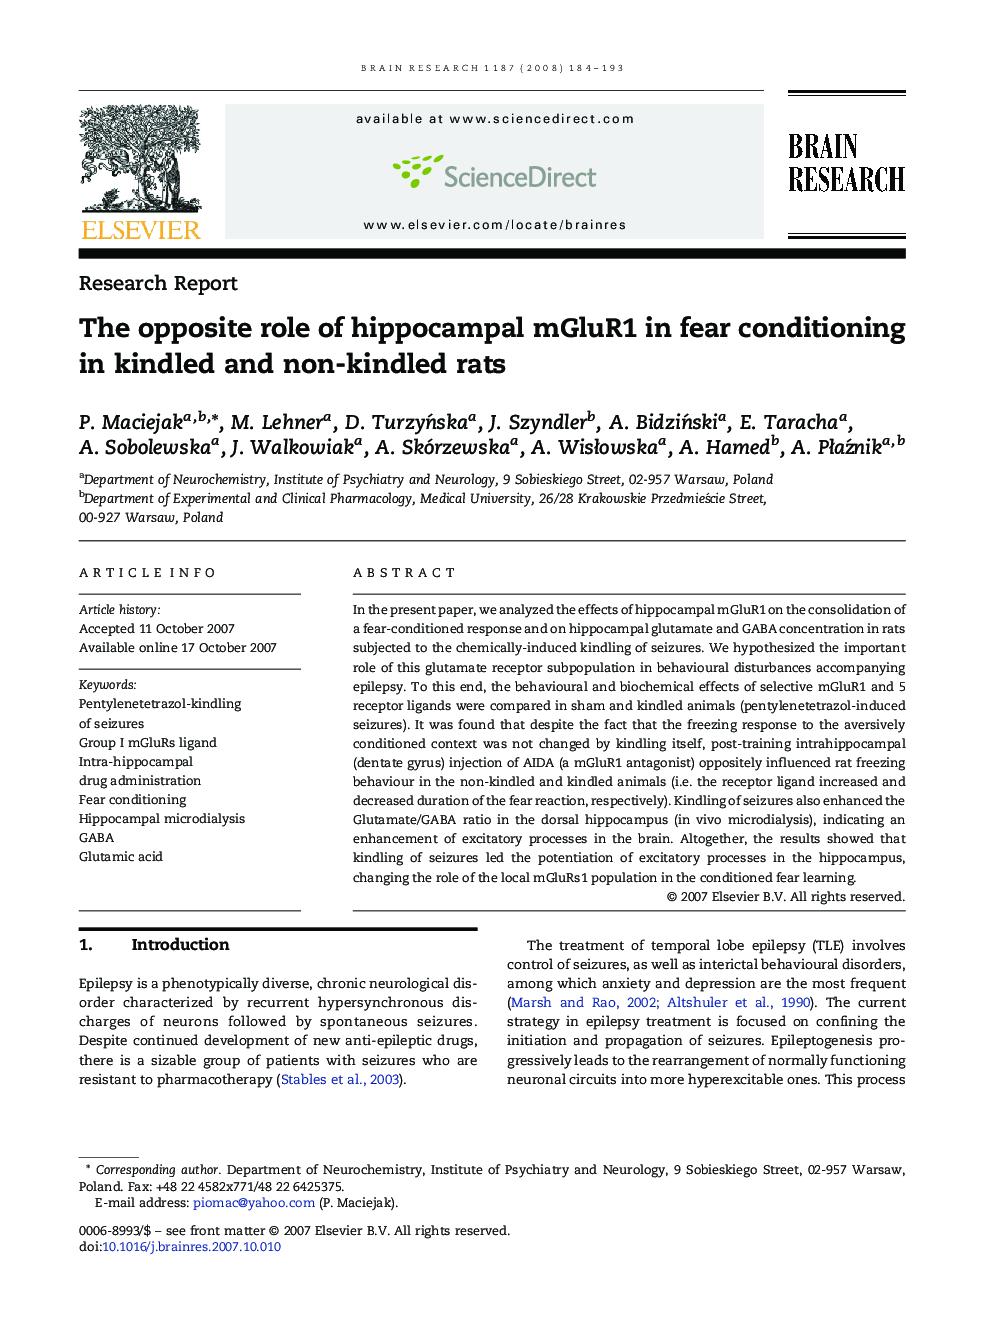 The opposite role of hippocampal mGluR1 in fear conditioning in kindled and non-kindled rats